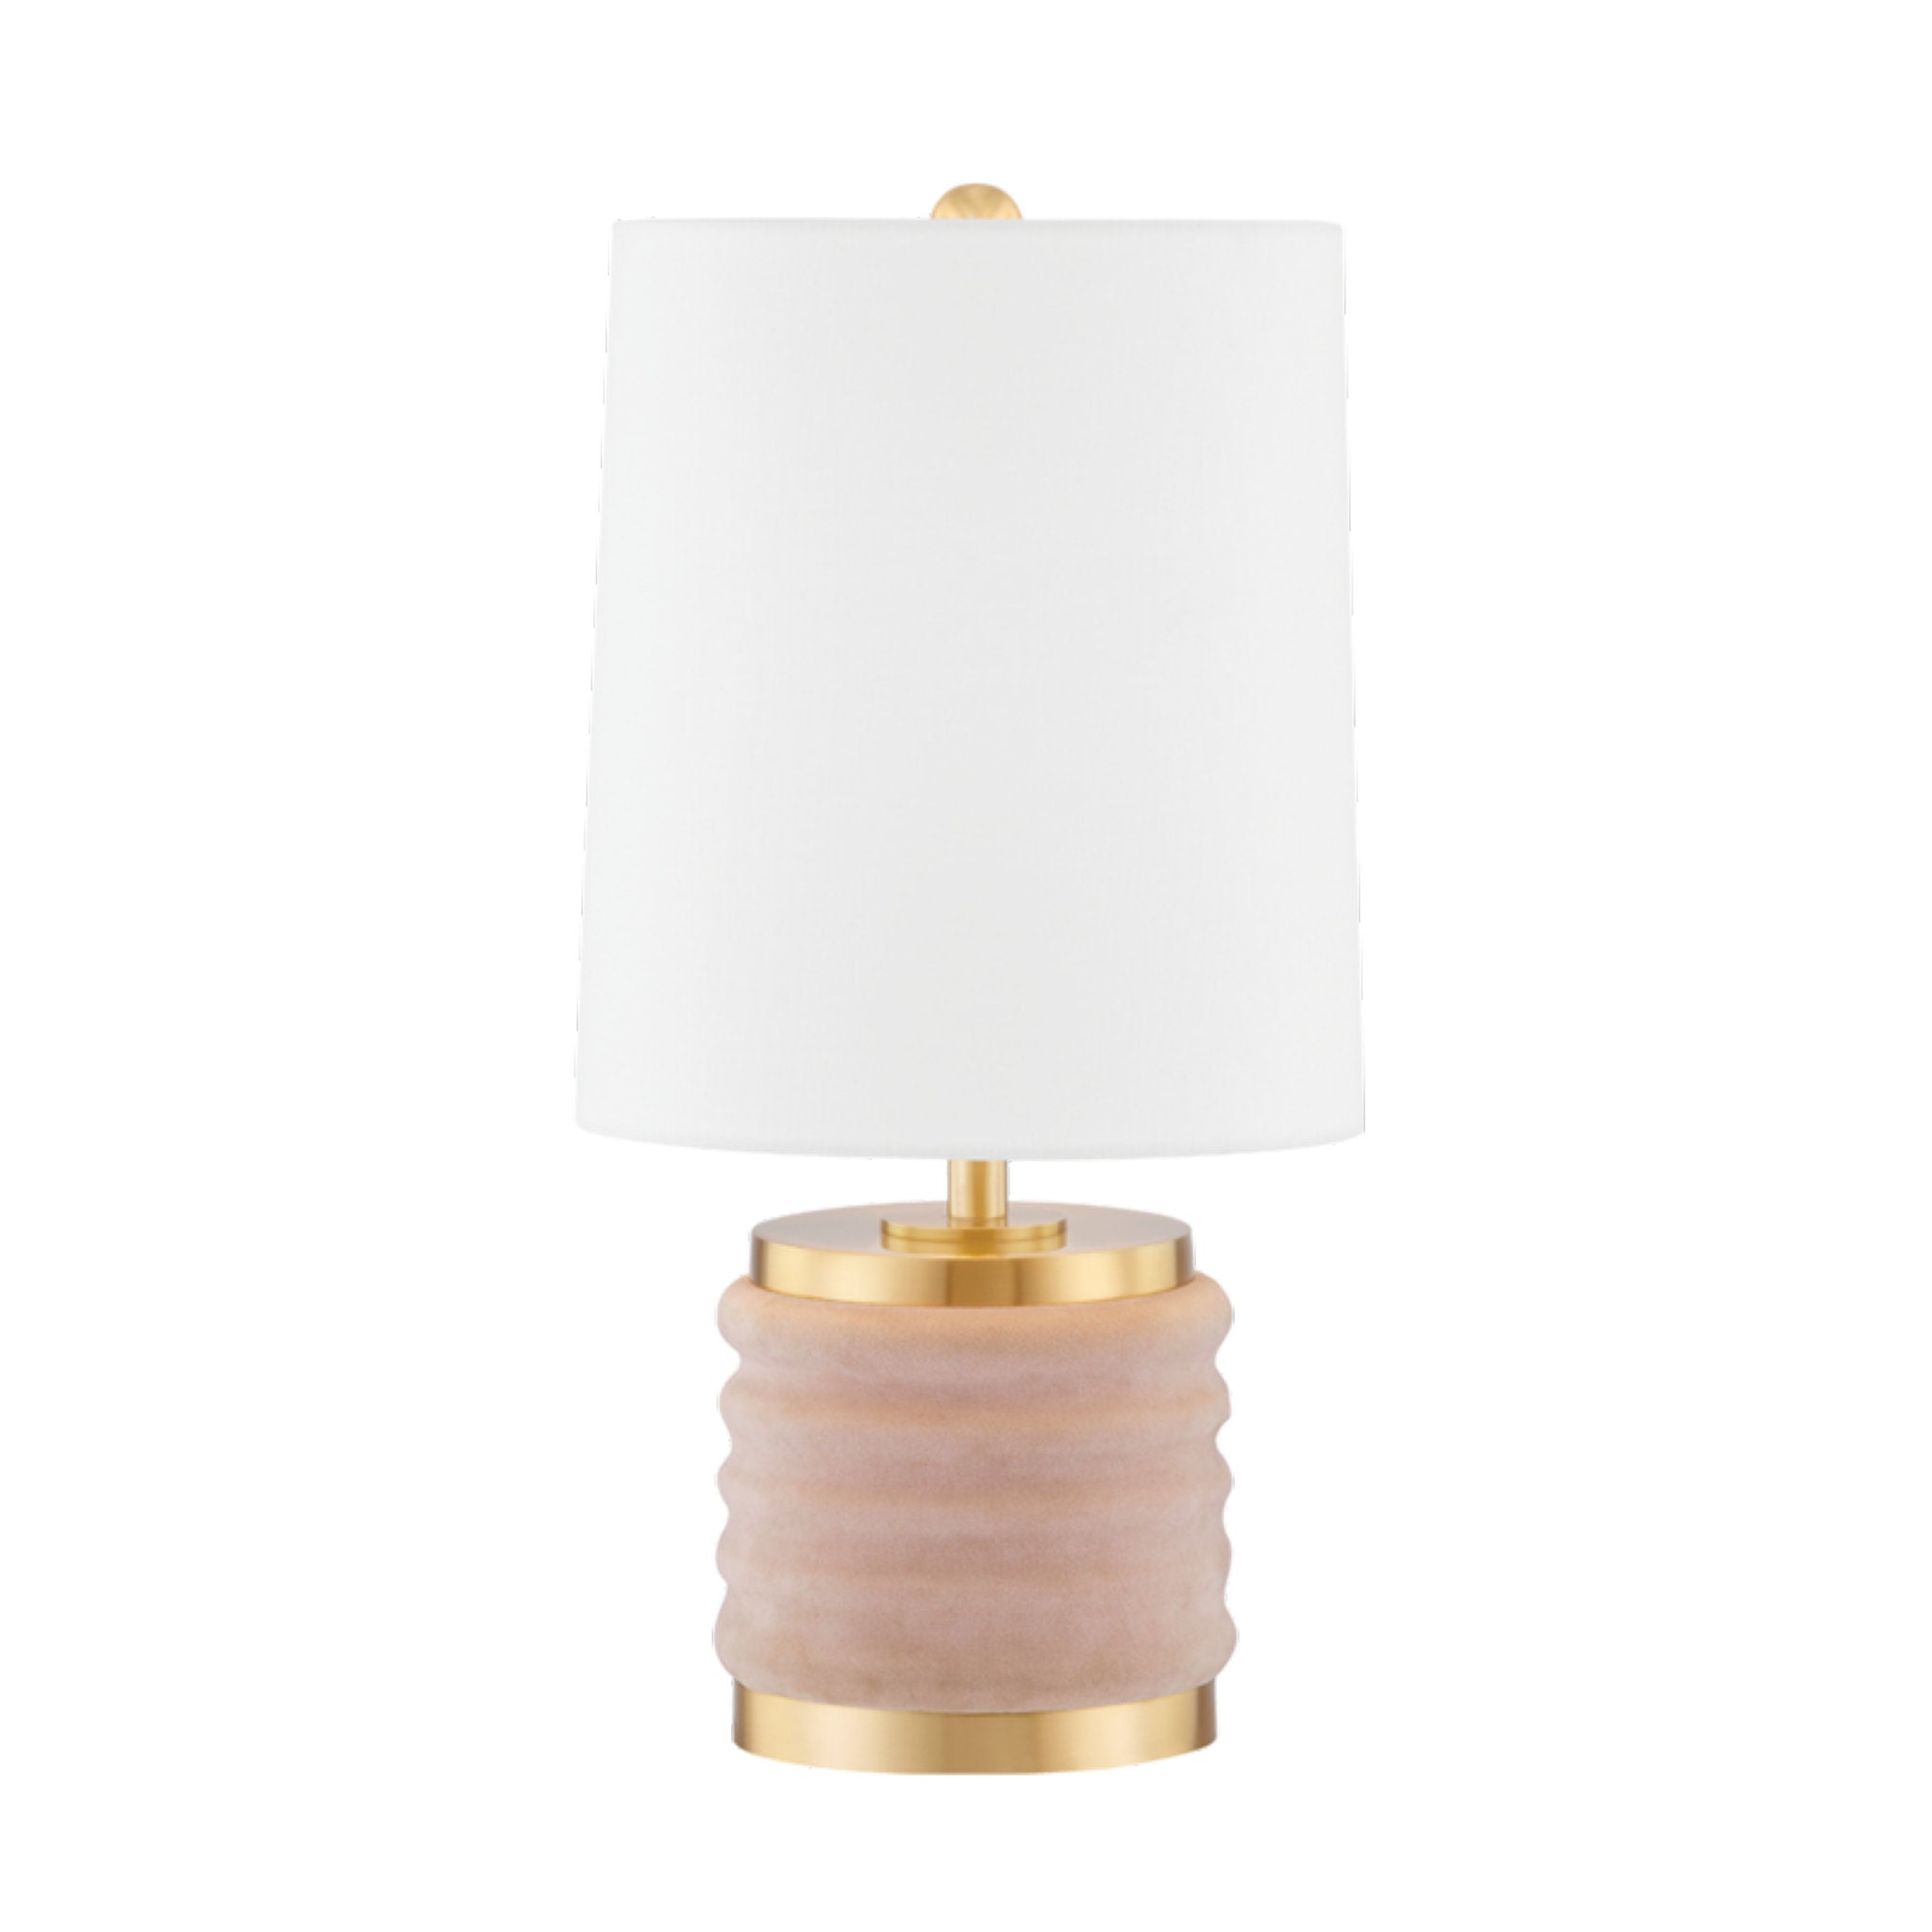 Bethany 1-Light Table Lamp in Aged Brass/Blush Combo